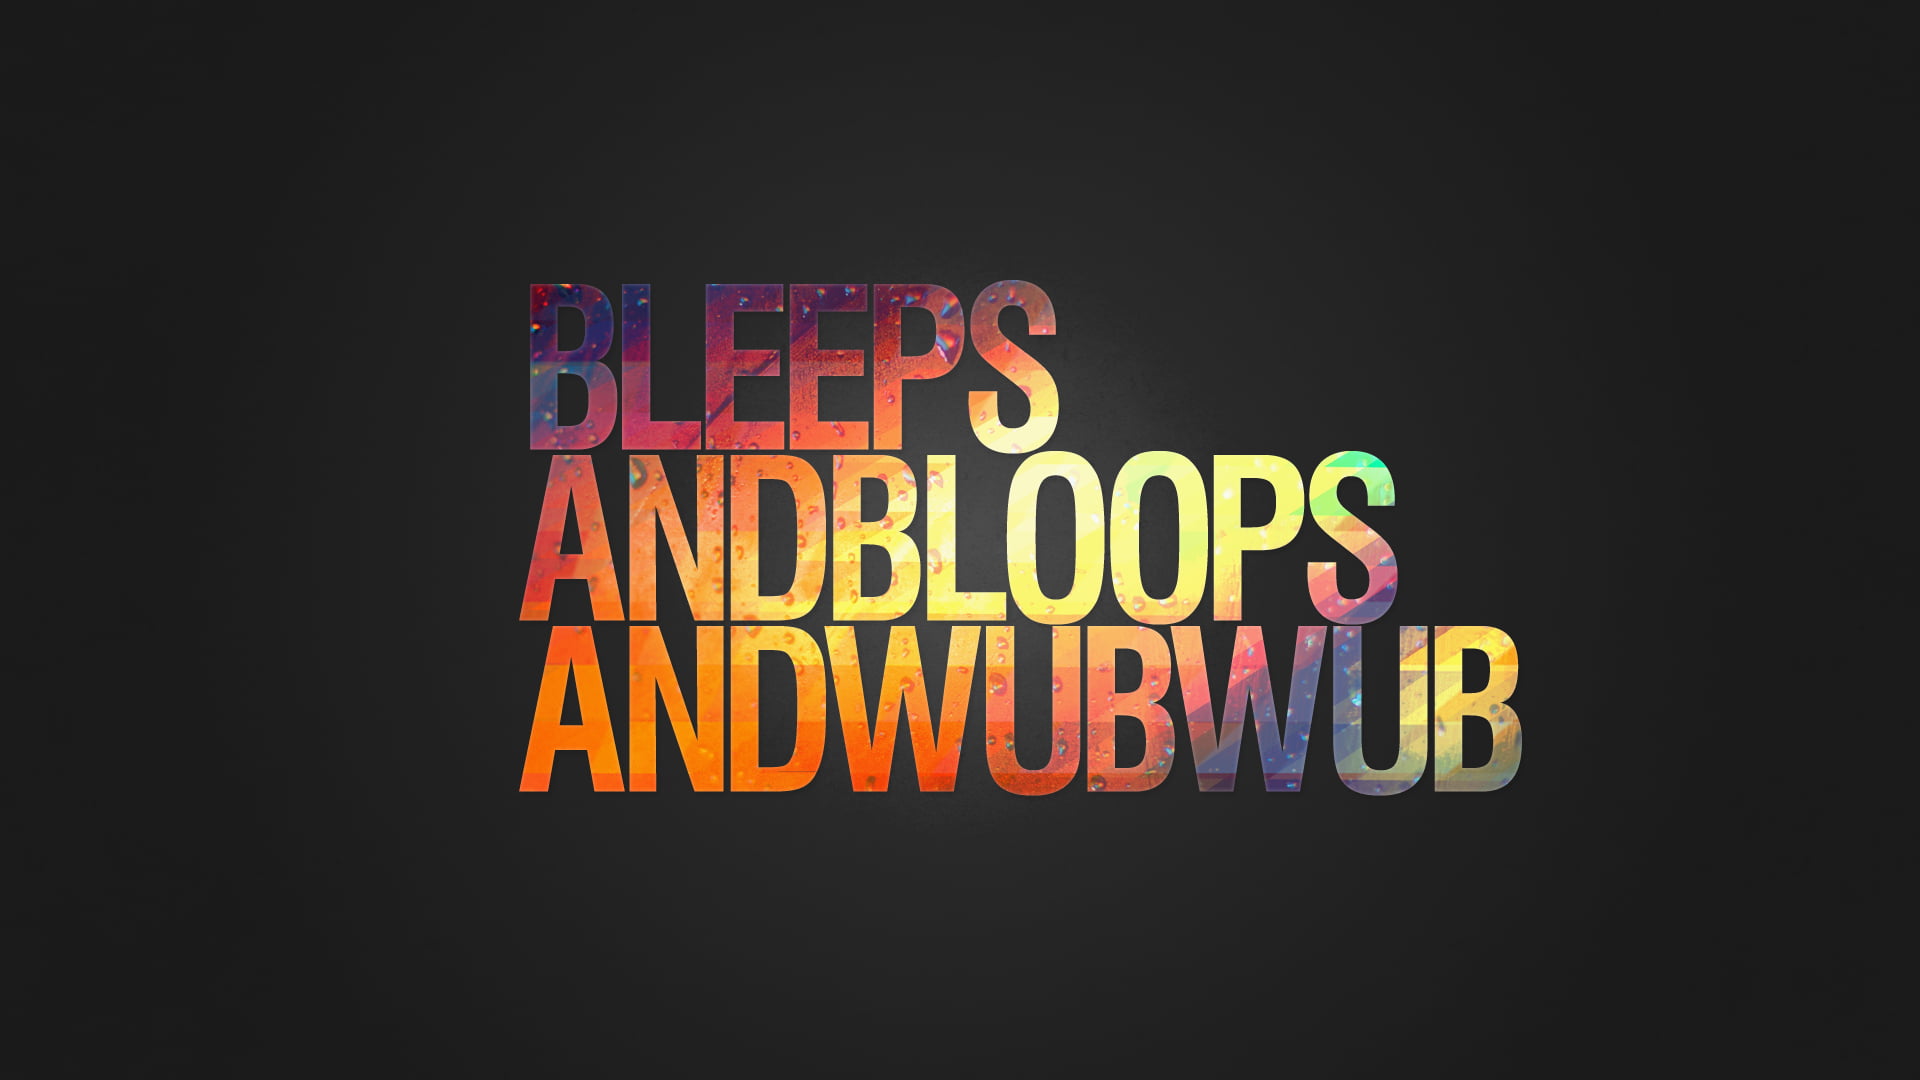 Bleeps And Bloops Andwubwub Text Overlay On Black Background Edm Trance Techno Dubstep Hd Wallpaper Wallpaper Flare